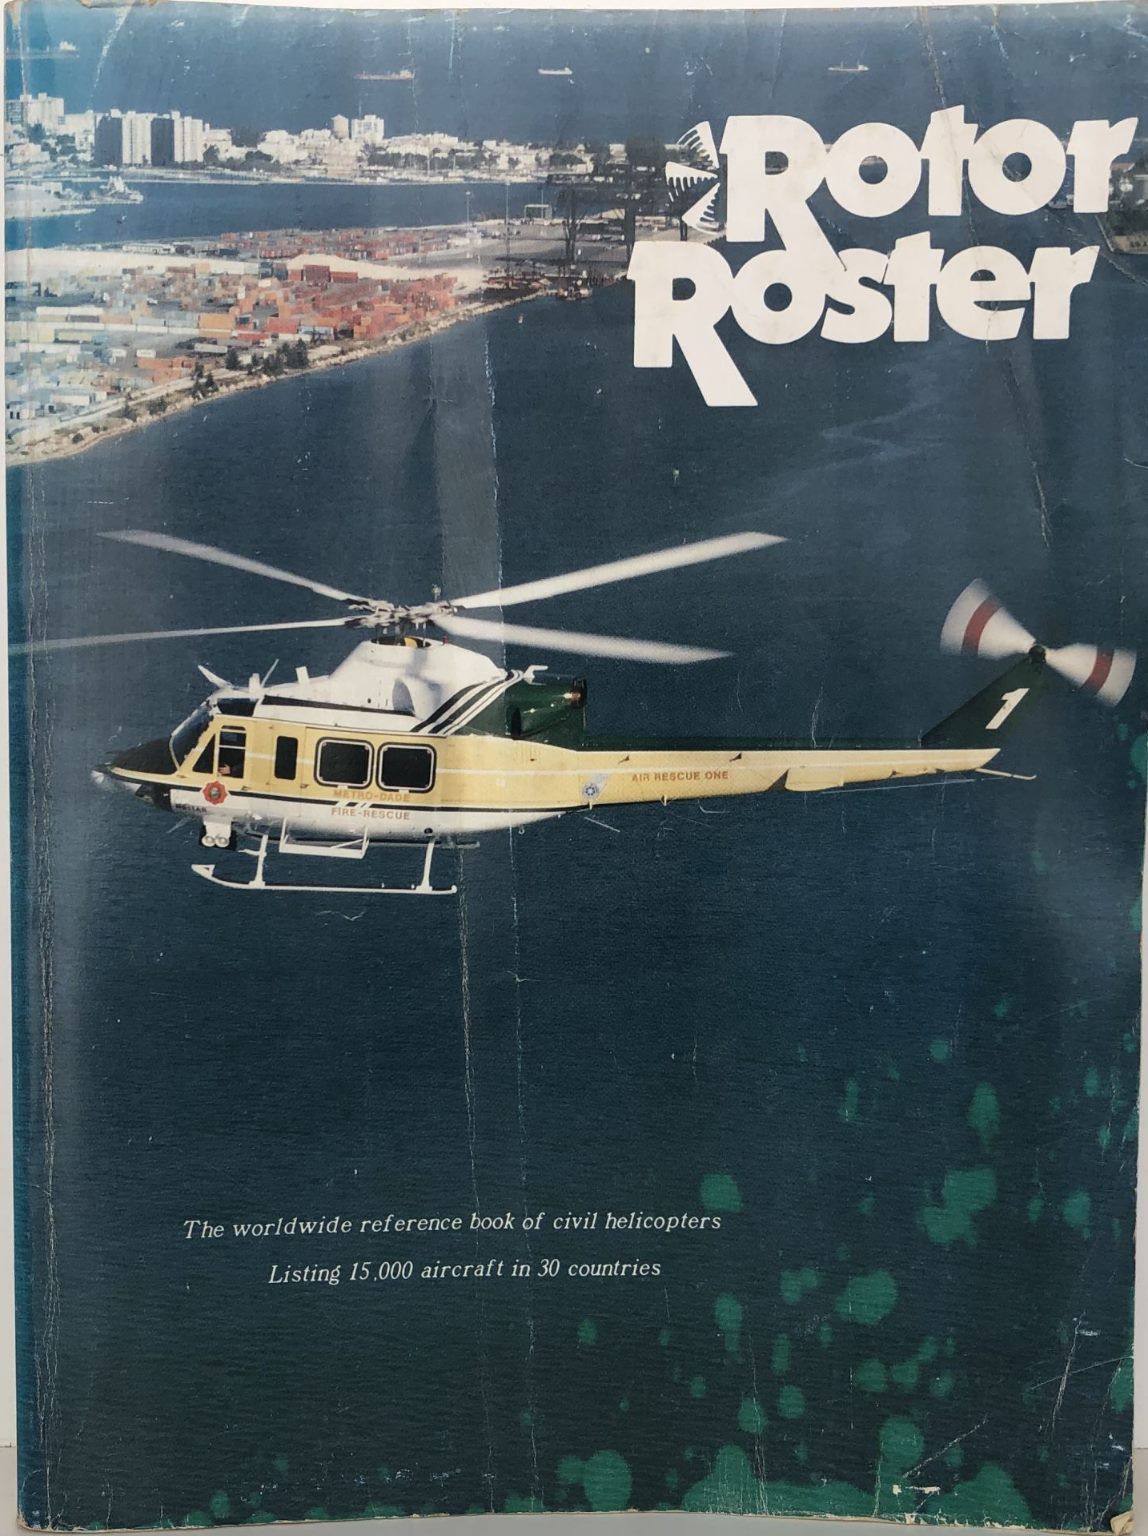 ROTOR ROSTER 1989: The Worldwide Reference Book of Civil Helicopters